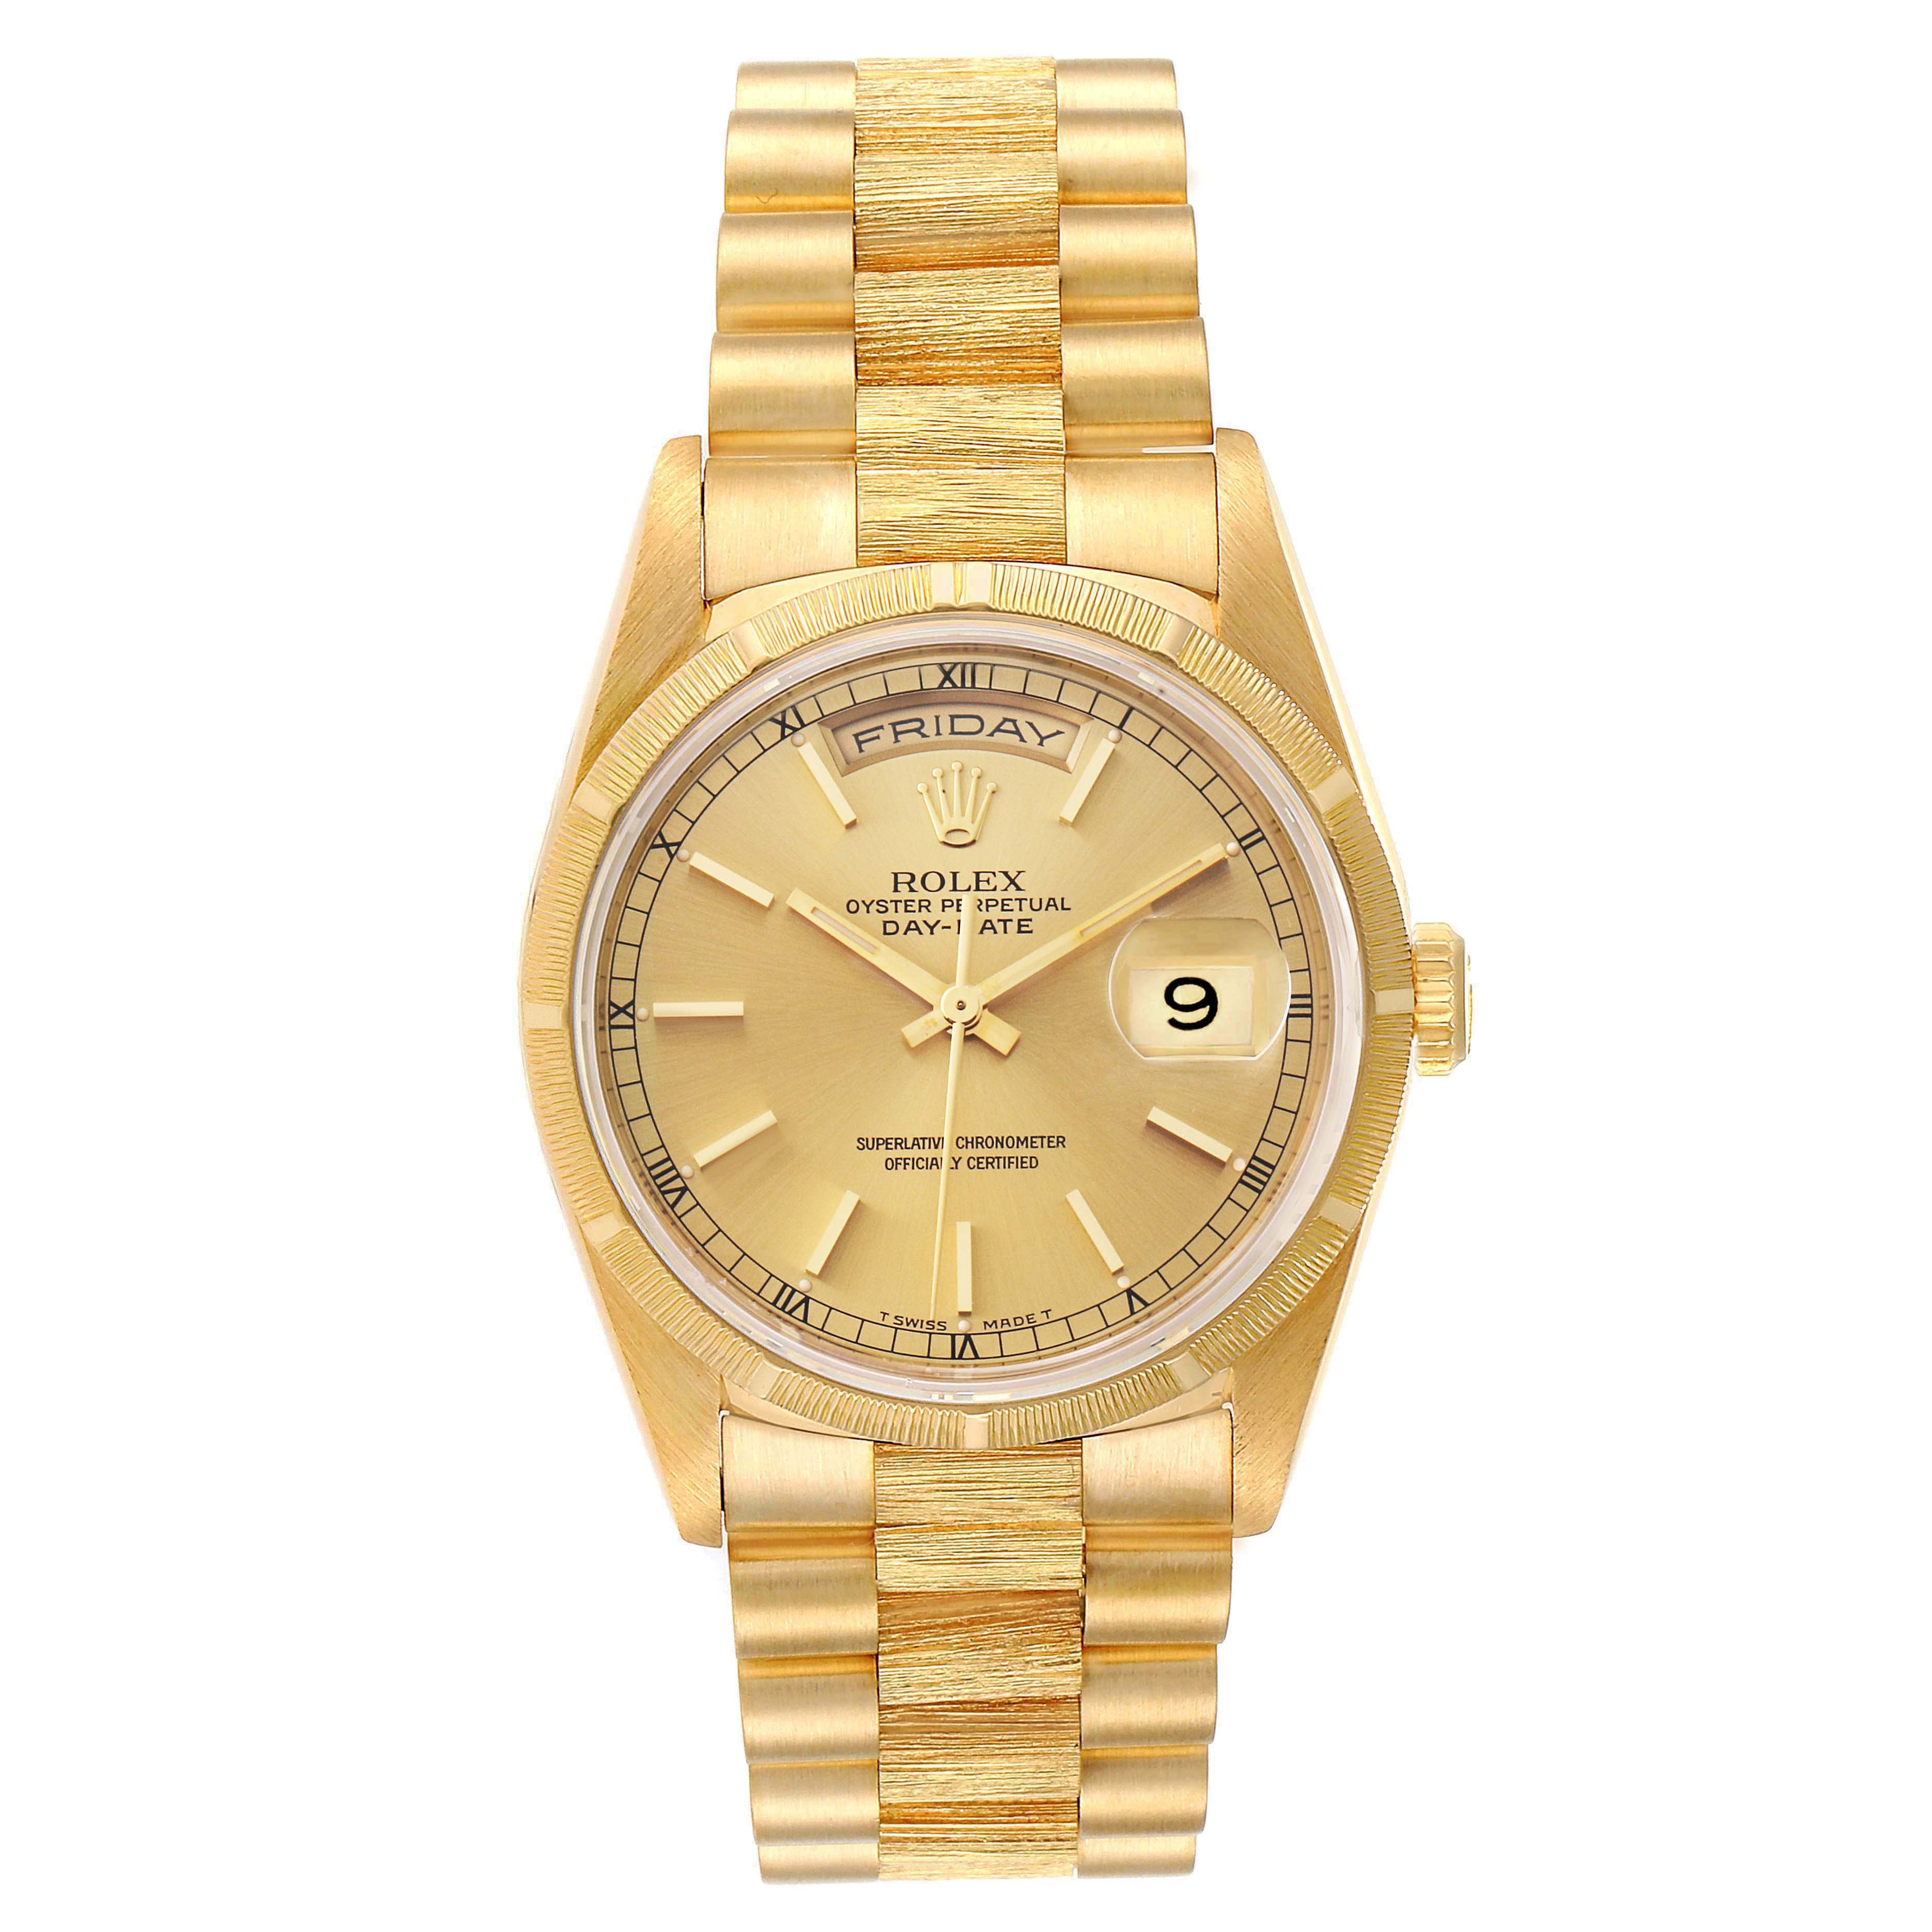 Rolex Day Date President 36mm Yellow Gold Bark Finish Mens Watch 18248 38936 A9a20 